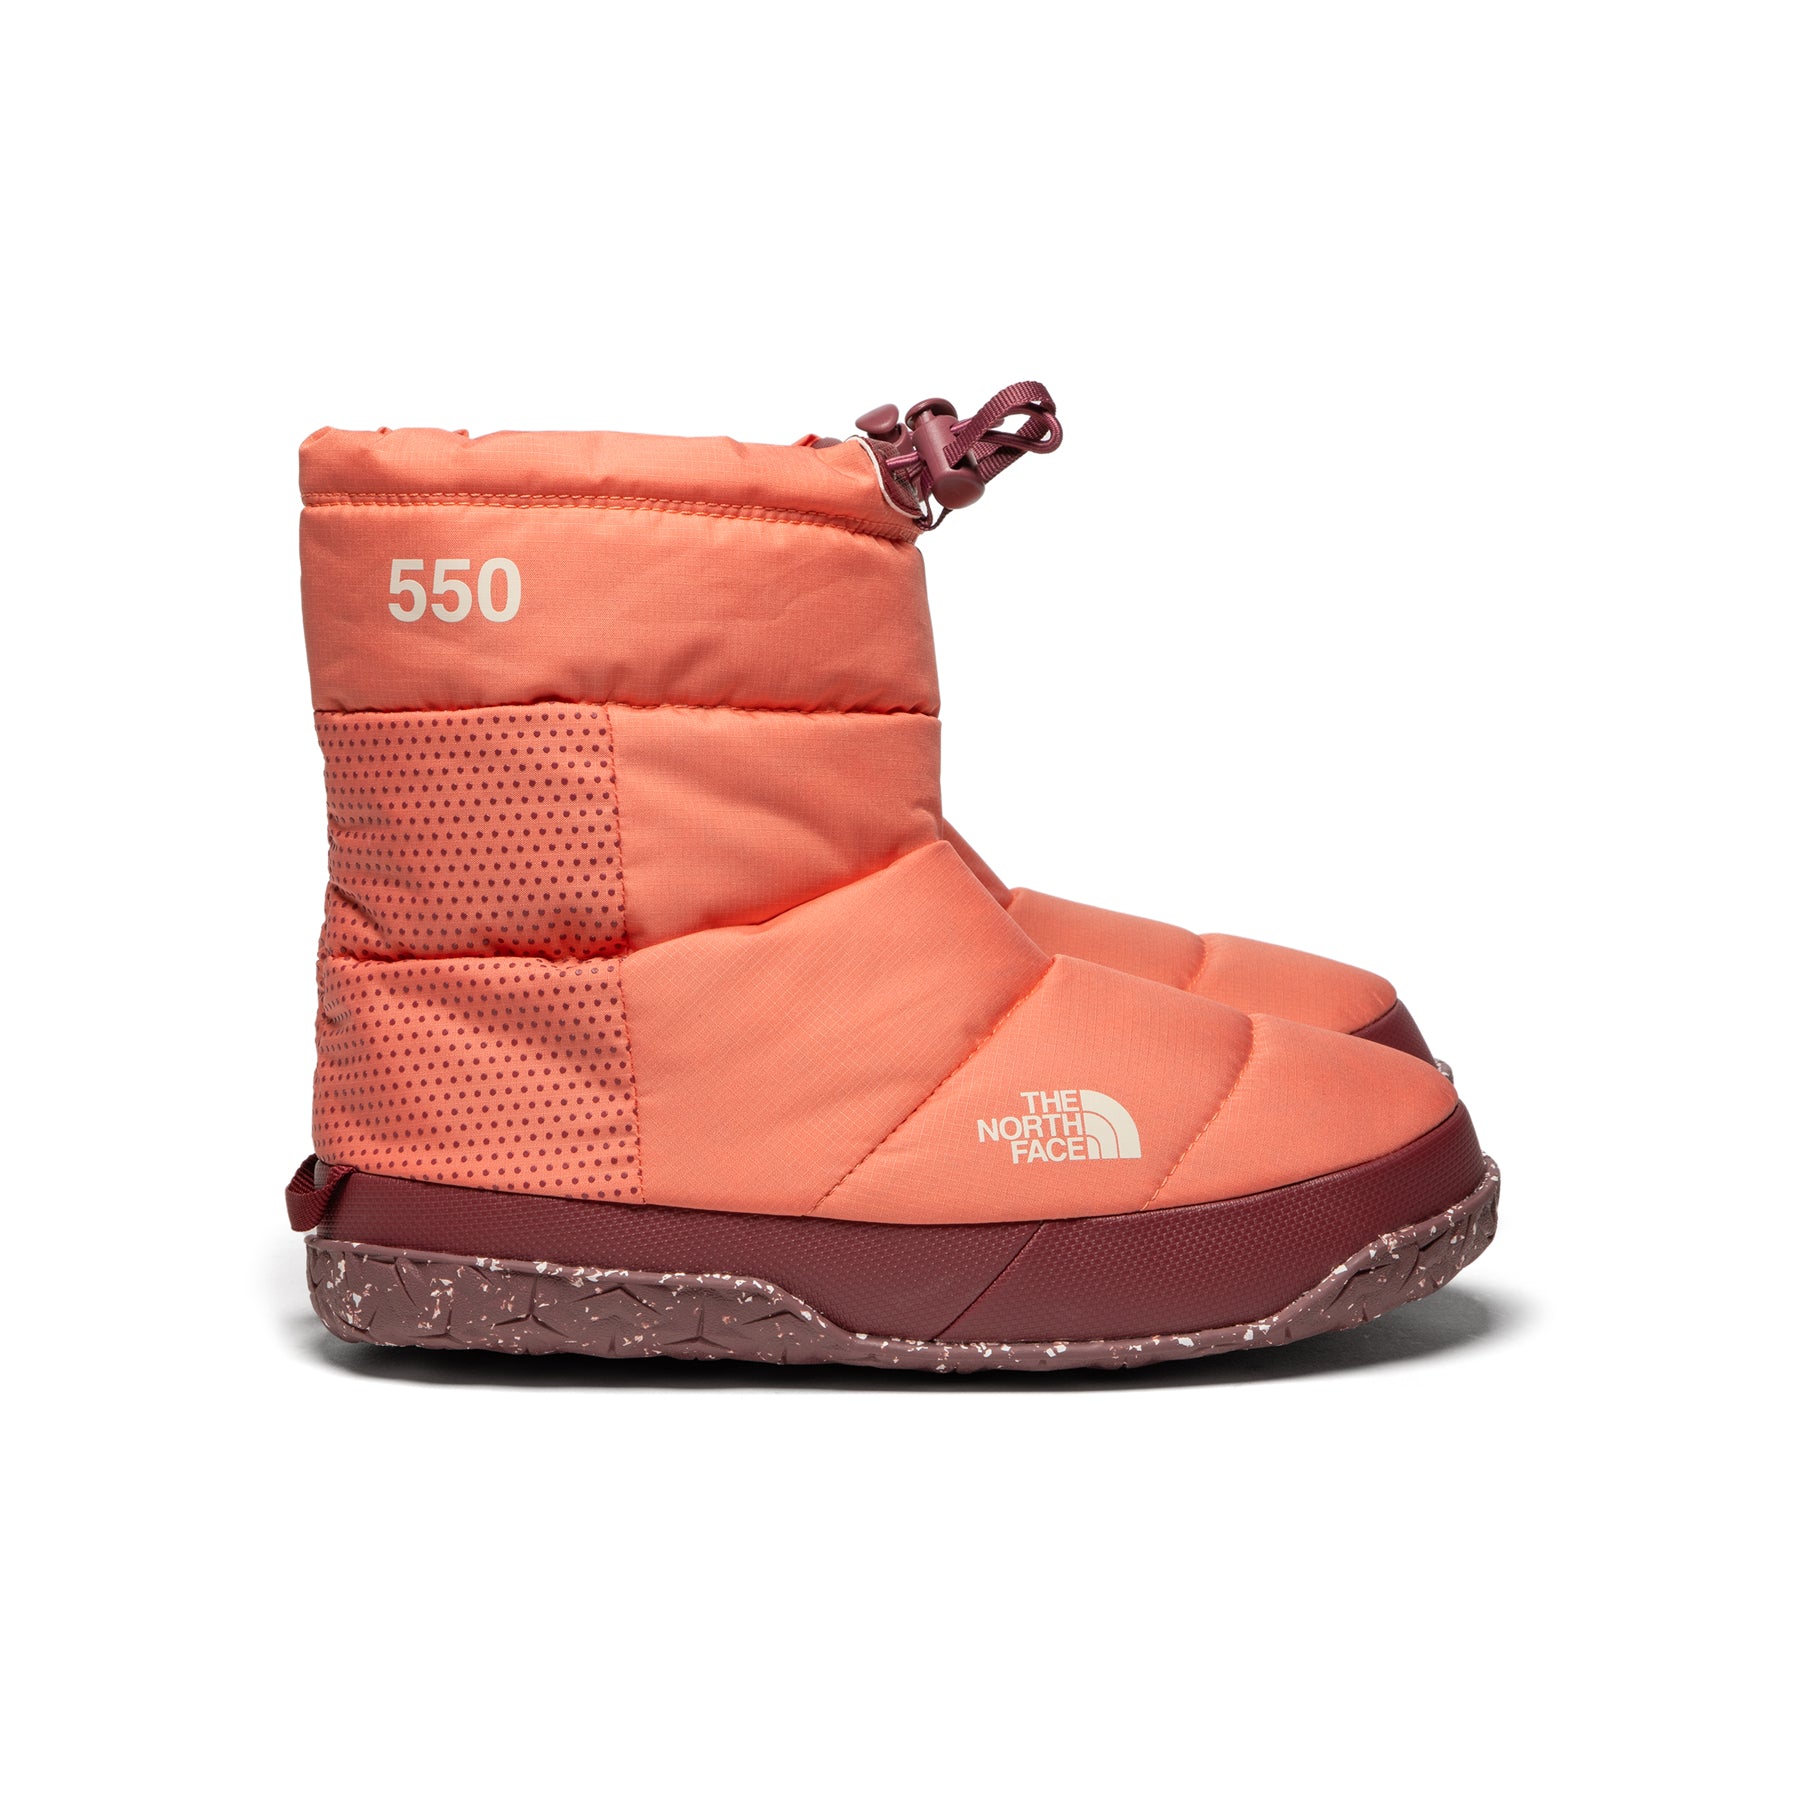 The North Face Womens Nuptse Après Bootie (Coral Sunrise/Wild Ginger)